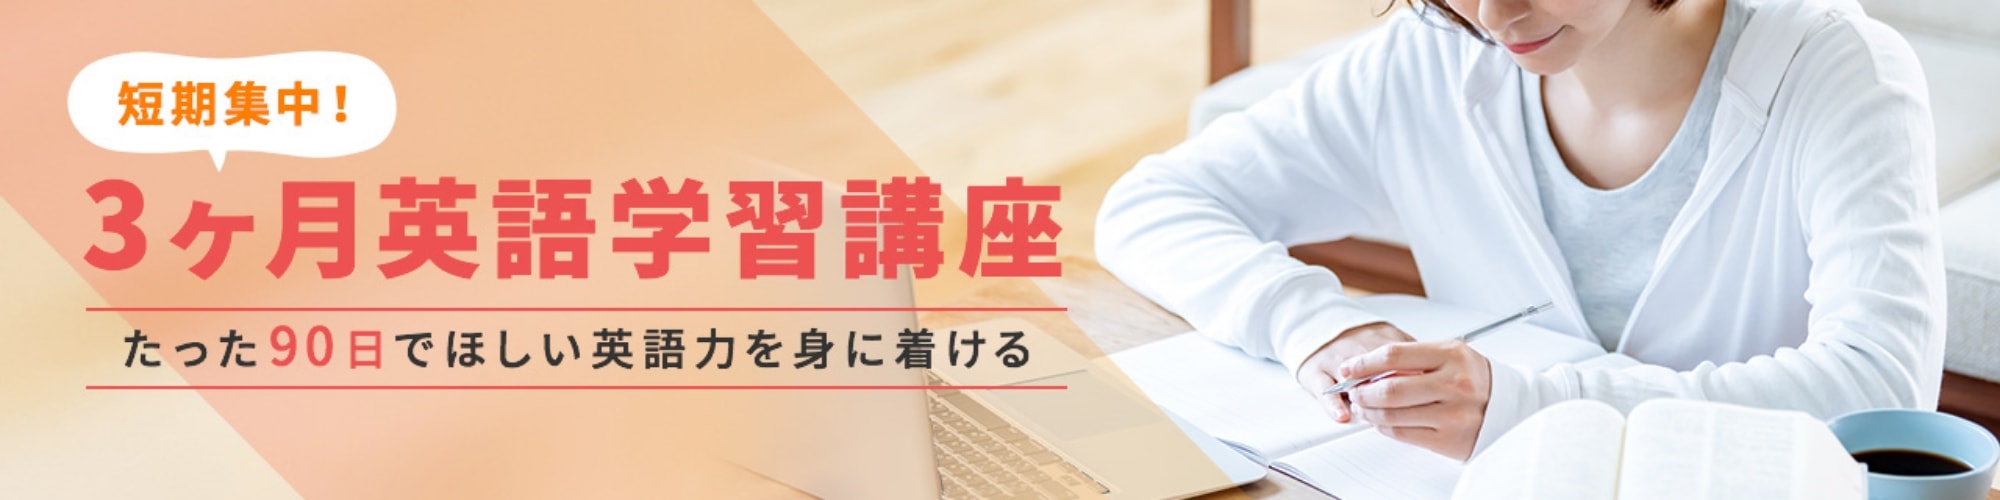 If You Re Happy And You Know It 幸せなら手をたたこう 英語版 歌詞と日本語訳 株式会社e Lifework